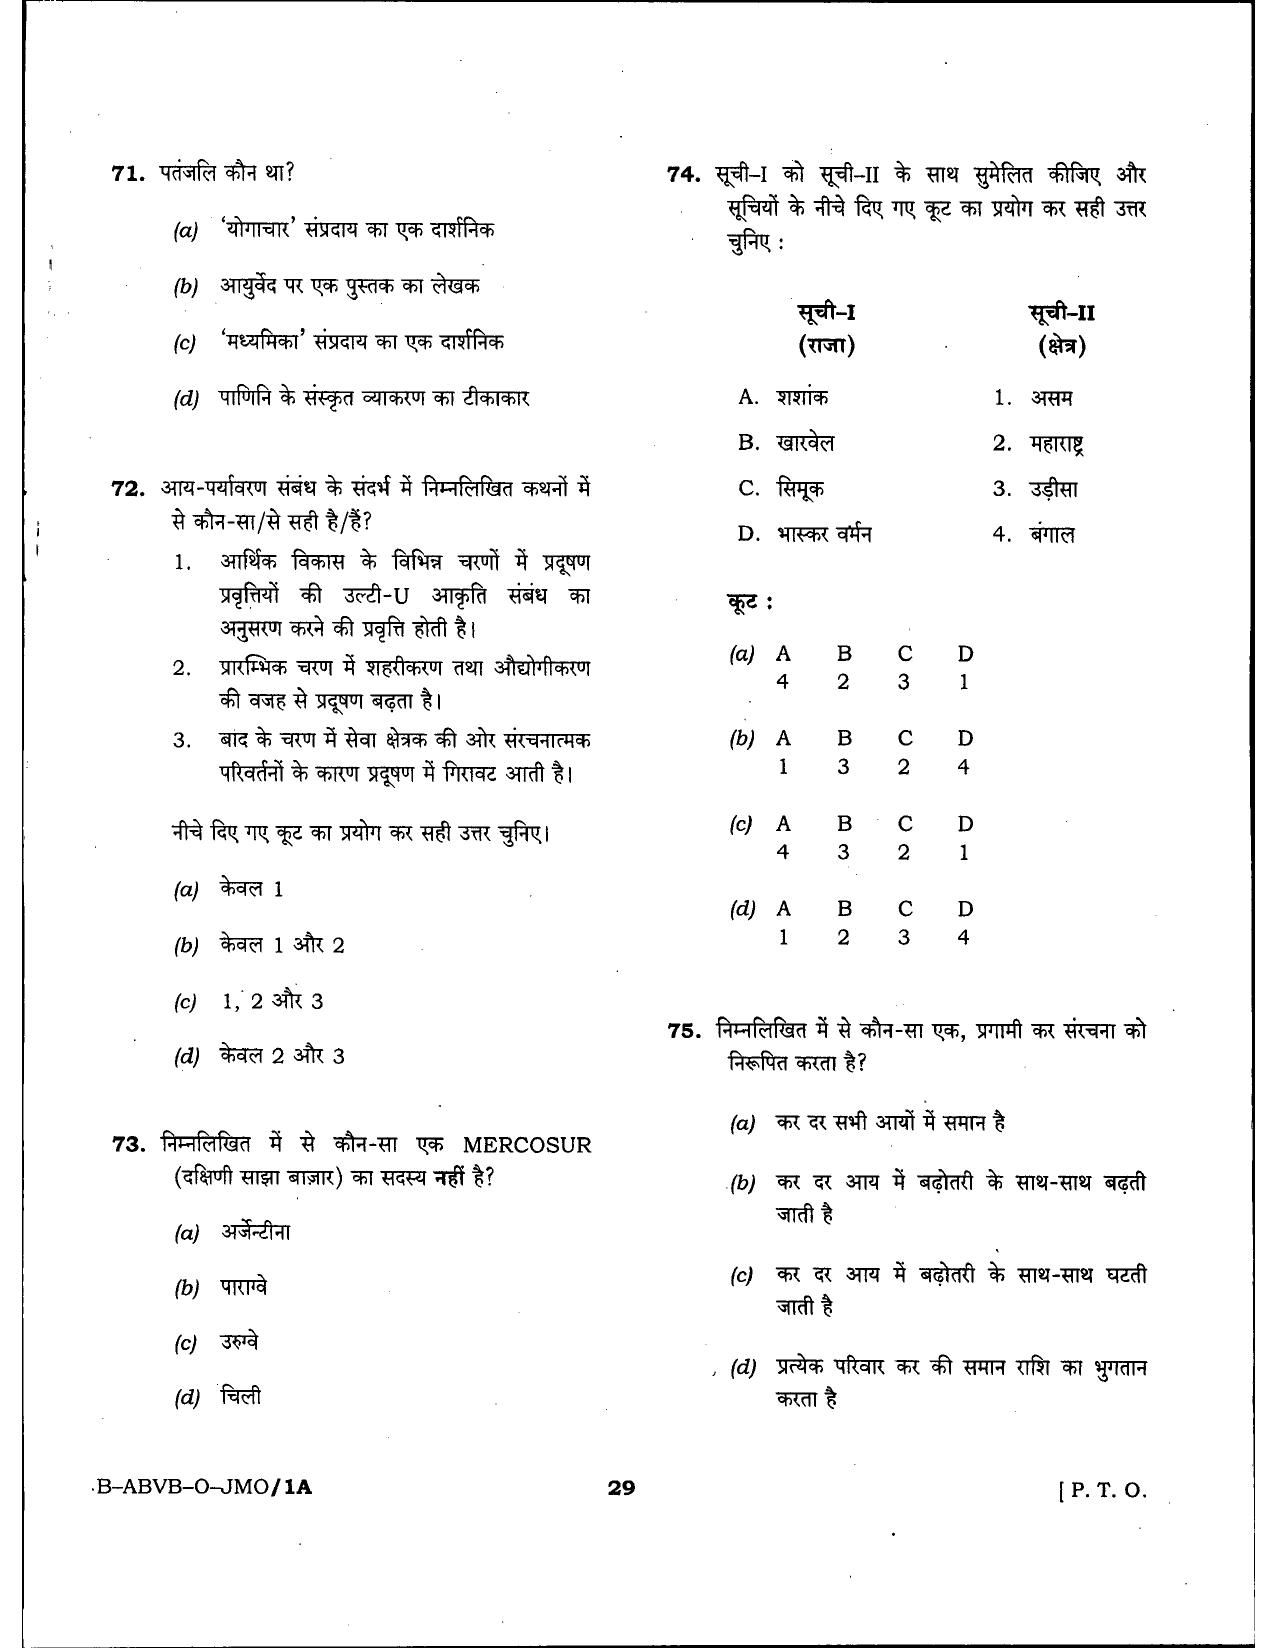 HPSSSB Fitter Model Papers: General Knowledge - Page 29